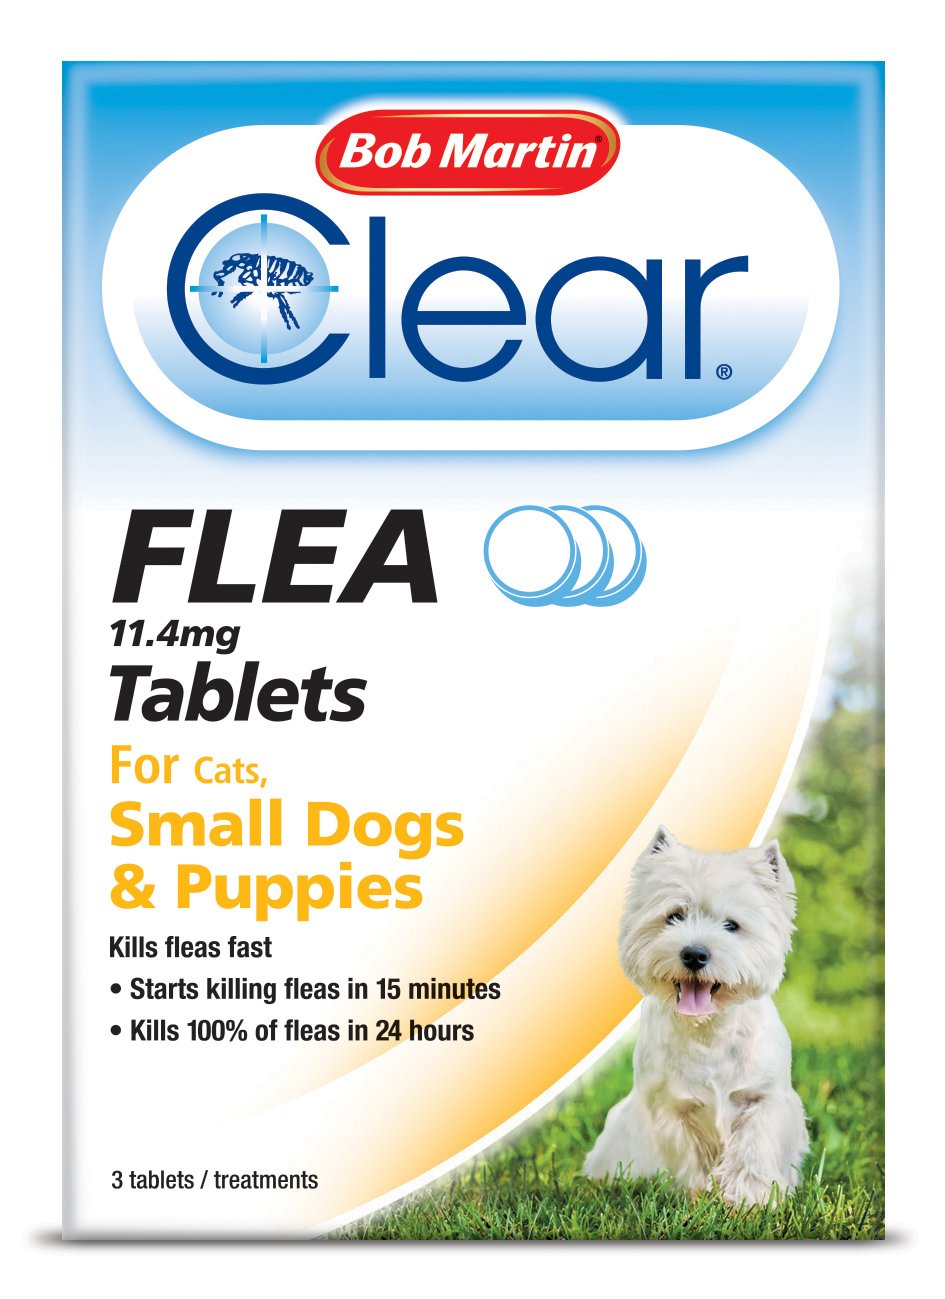 Bob Martin Clear Tablets For Small Dogs And Puppies 3 Tablets